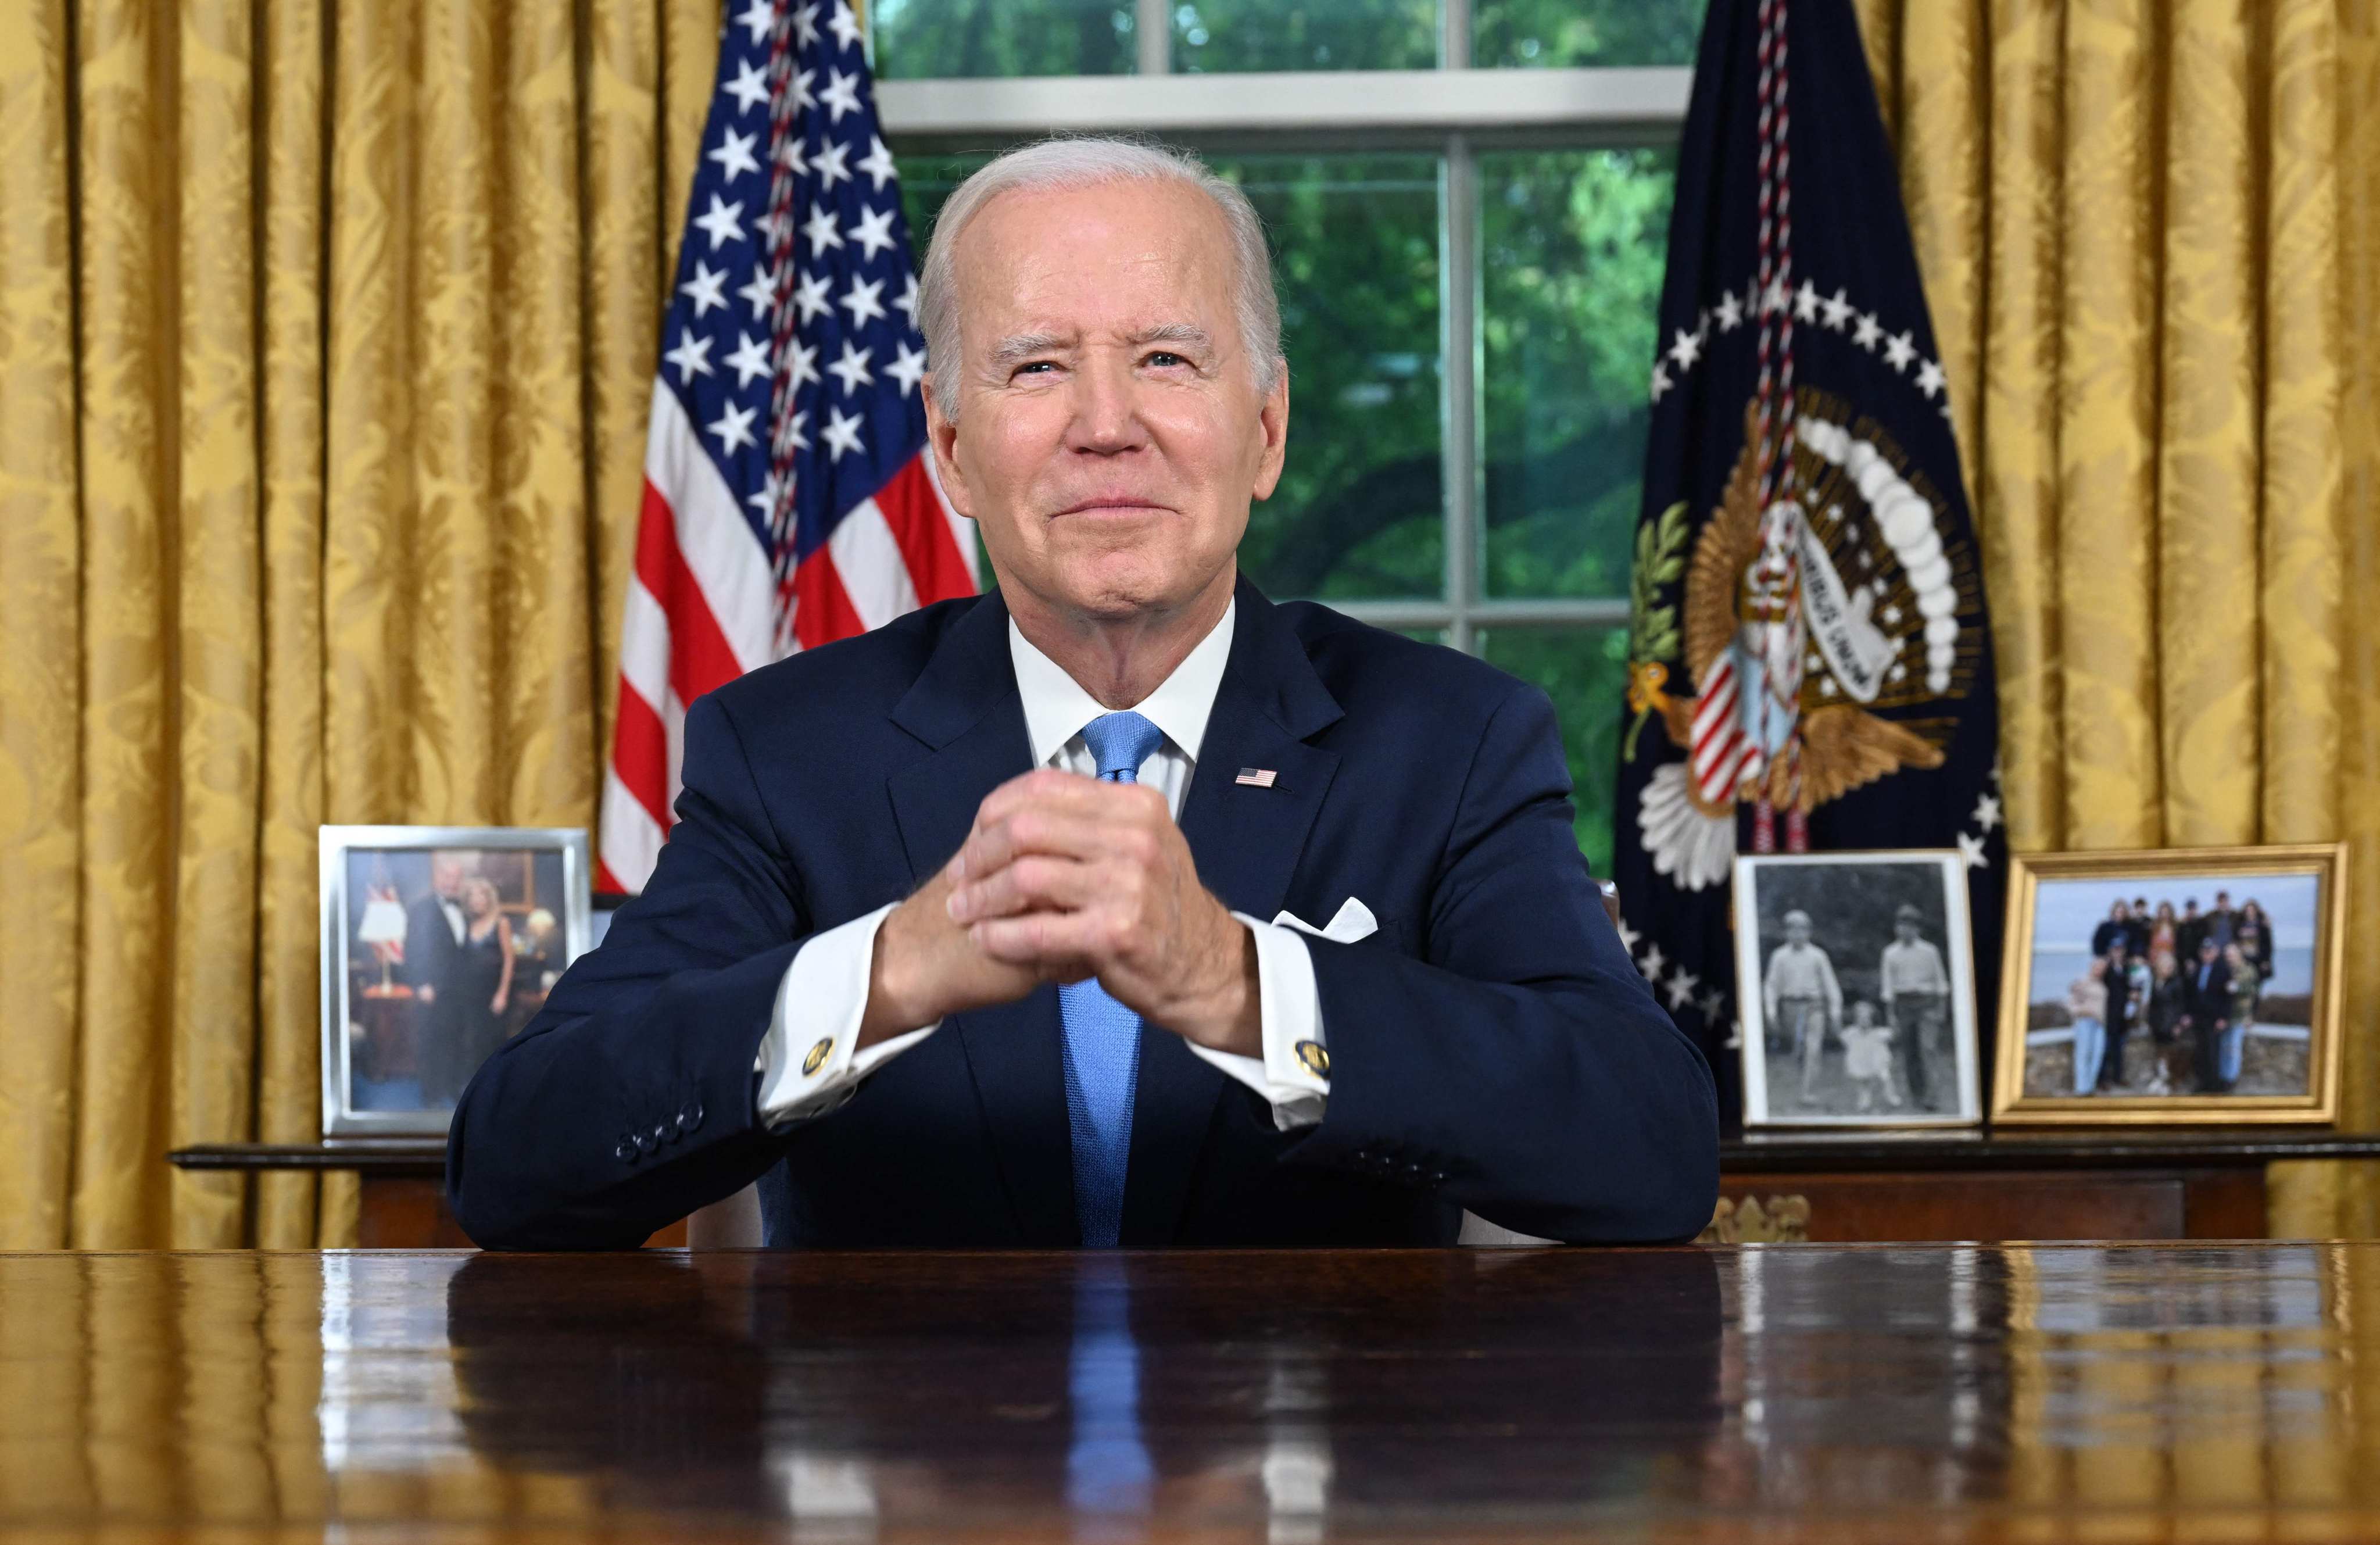 US President Joe Biden addresses the nation from the Oval Office of the White House on Friday. Photo: AFP